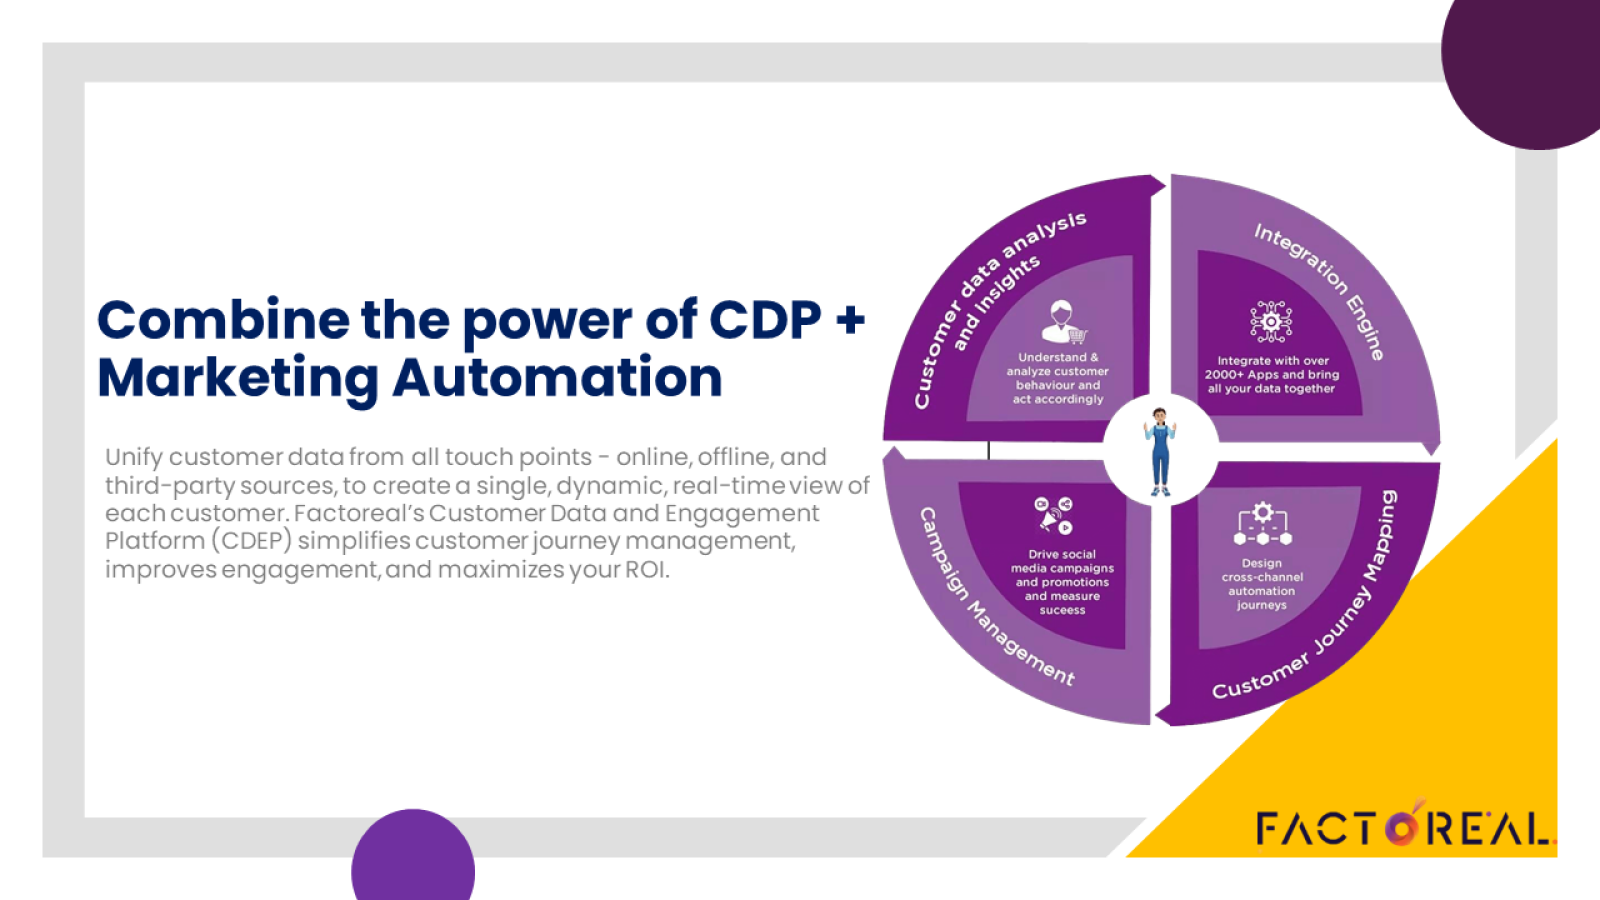 Power of CDP + Marketing Automation